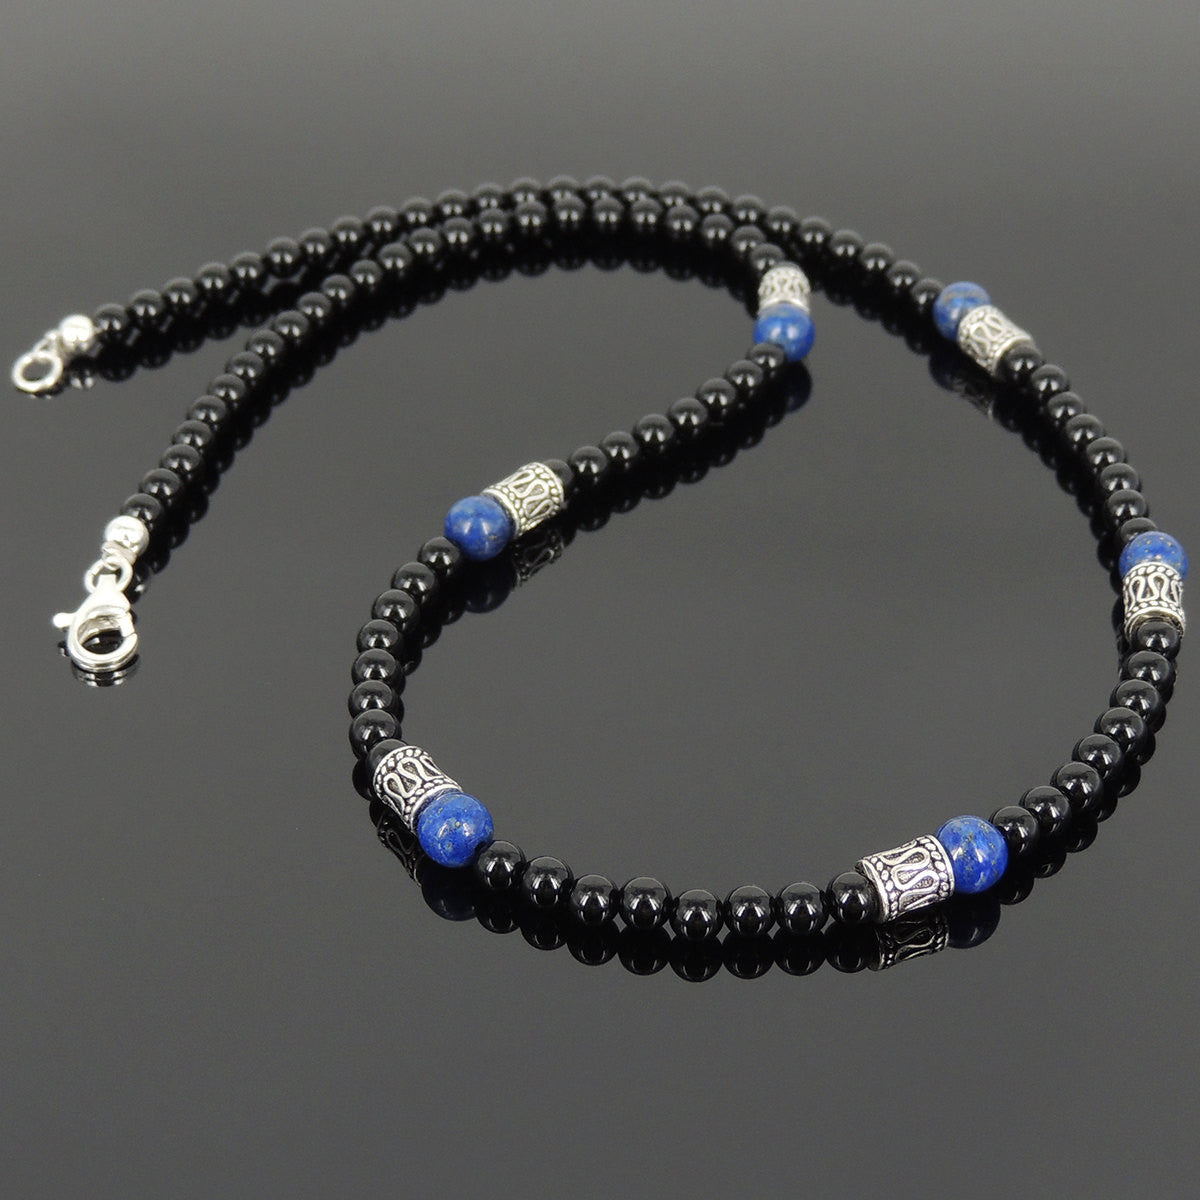 4mm Bright Black Onyx & Lapis Lazuli Healing Gemstone Necklace with S925 Sterling Silver Barrel Beads & Clasp - Handmade by Gem & Silver NK090